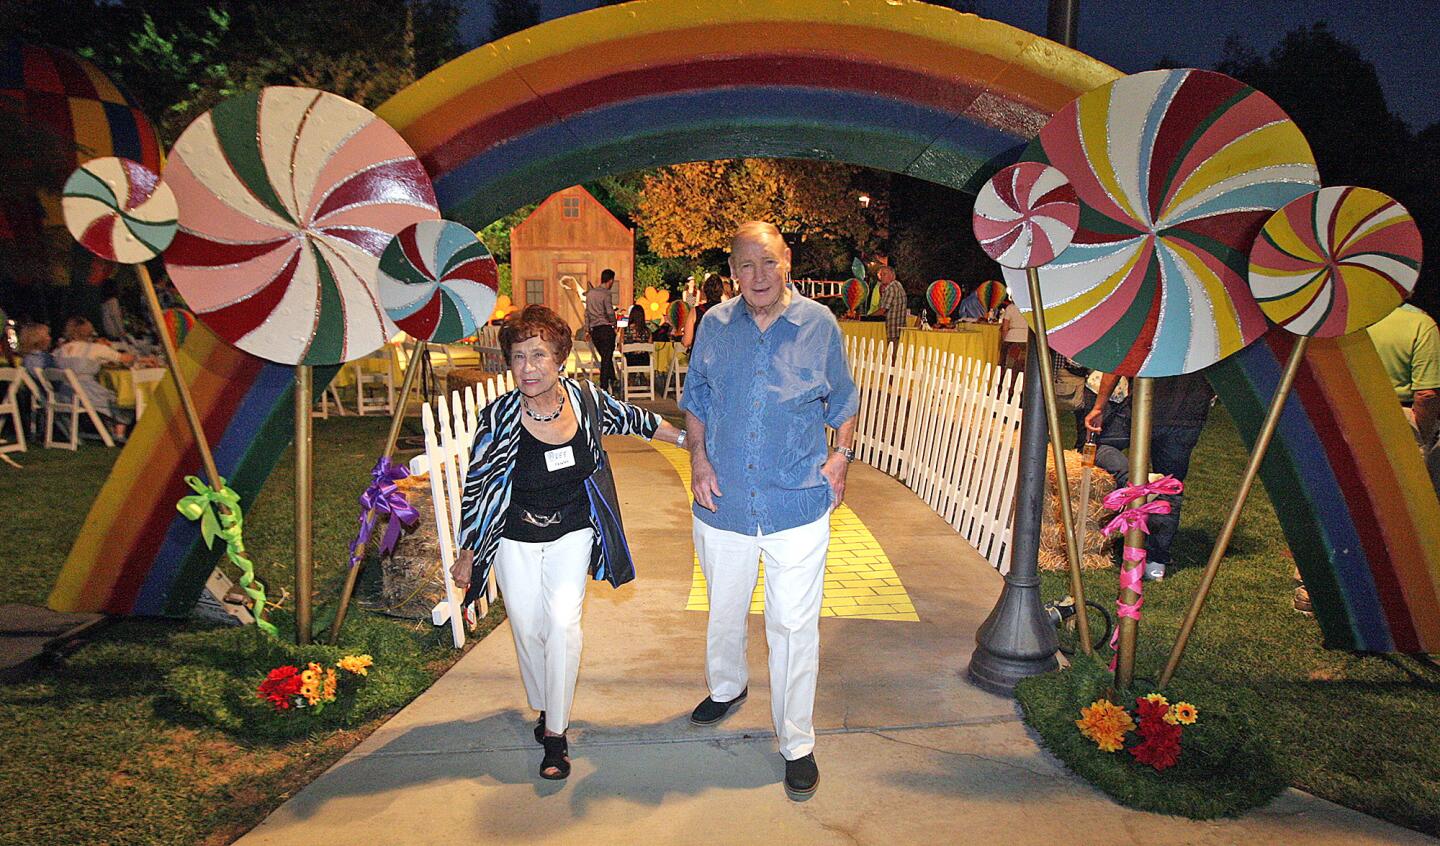 Dee and Fraser Draper, 40-year residents of La Cañada find themselves under the rainbow at Olberz Park in La Cañada Flintridge at the annual La Cañada Flintridge Chamber of Commerce mixer on Thursday, September 17, 2015.